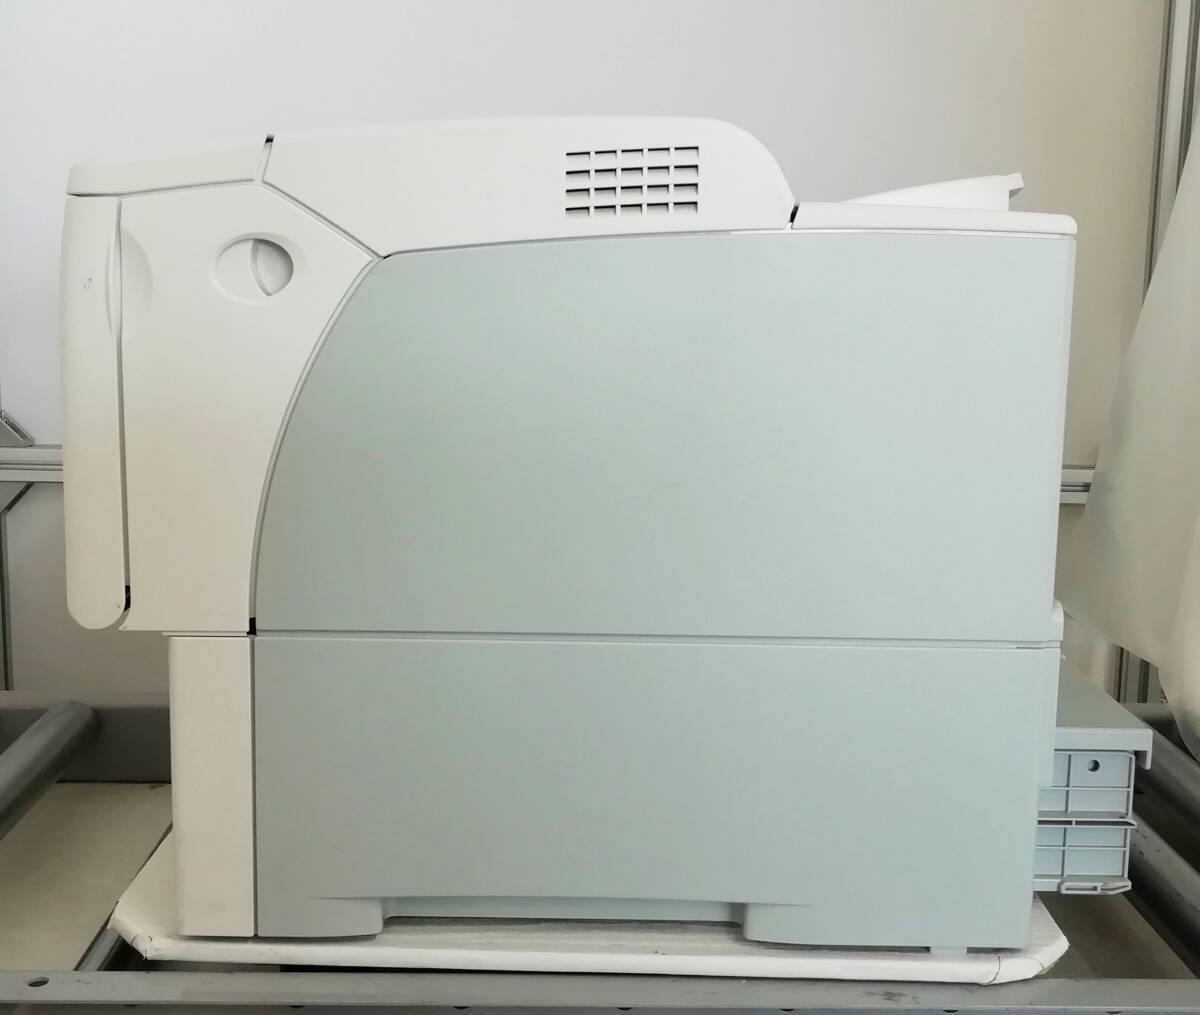 [ printing sheets number :3863 sheets ]FUJI XEROX A3 monochrome laser printer -DocuPrint 3050 used toner attaching same day shipping one week returned goods guarantee [H24040122]